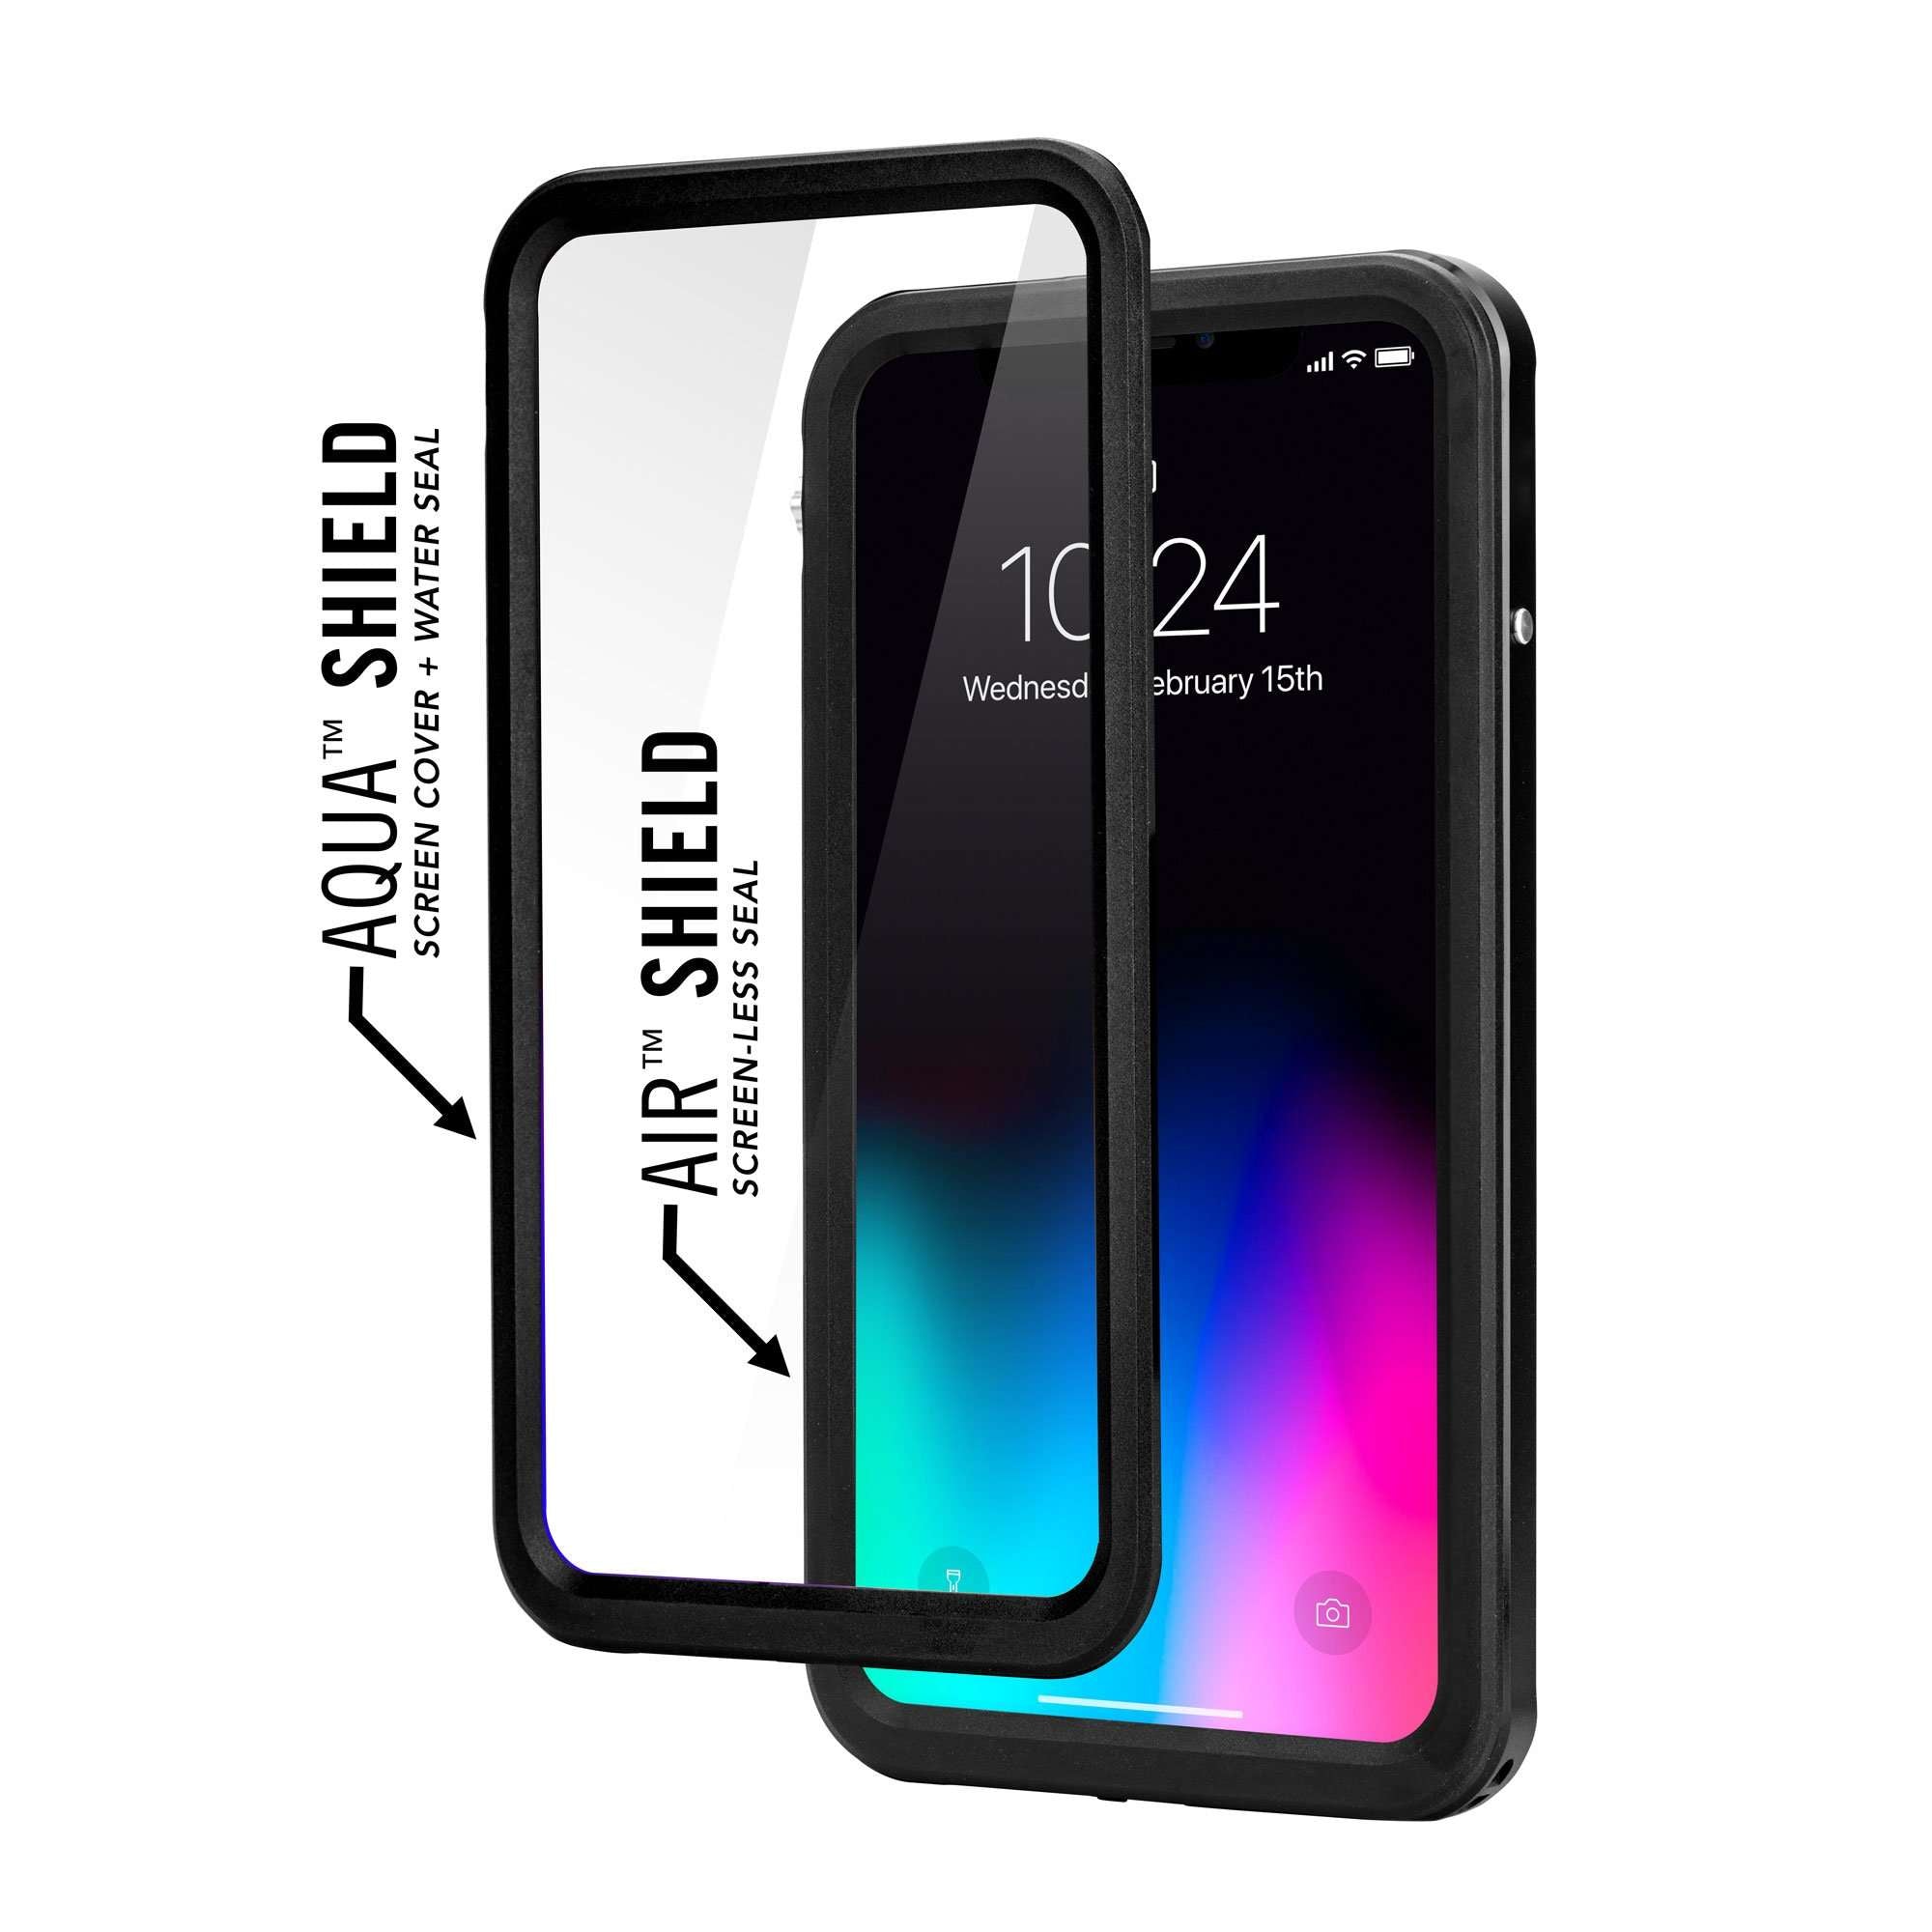 Hitcase Shield LINK for iPhone X/Xs